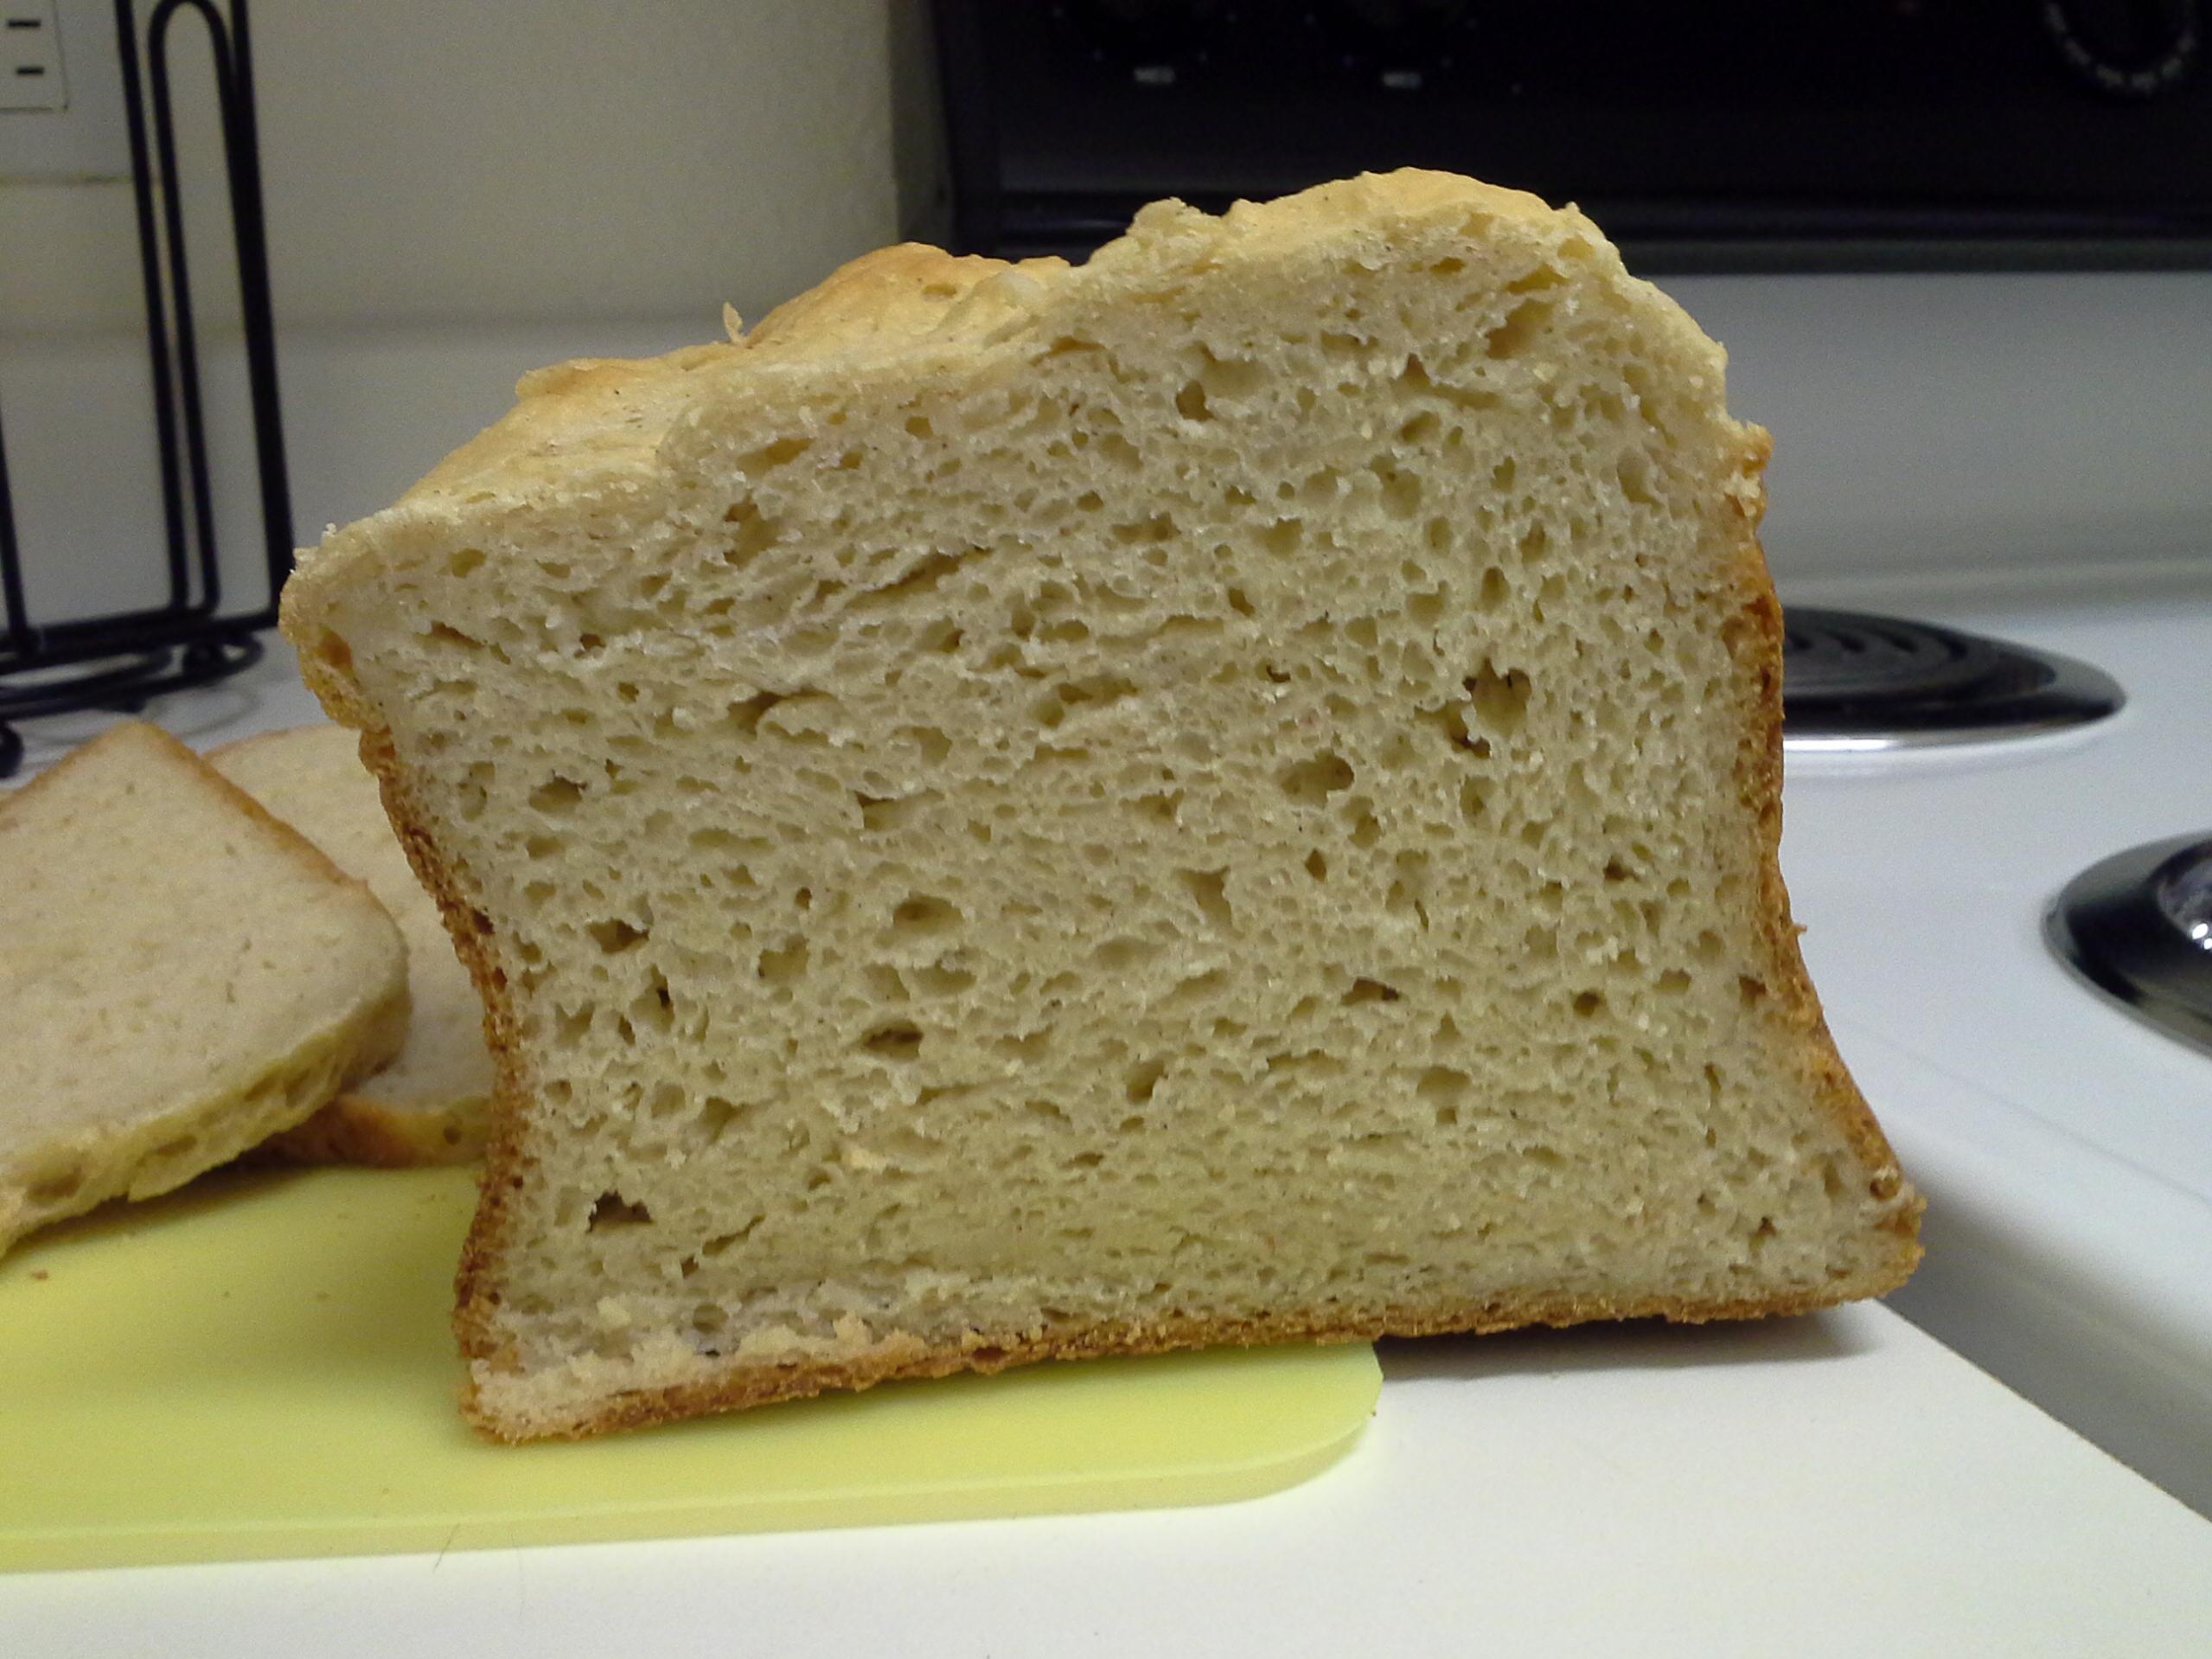 Bake the Perfect Loaf of Gluten-Free Bread with This Recipe